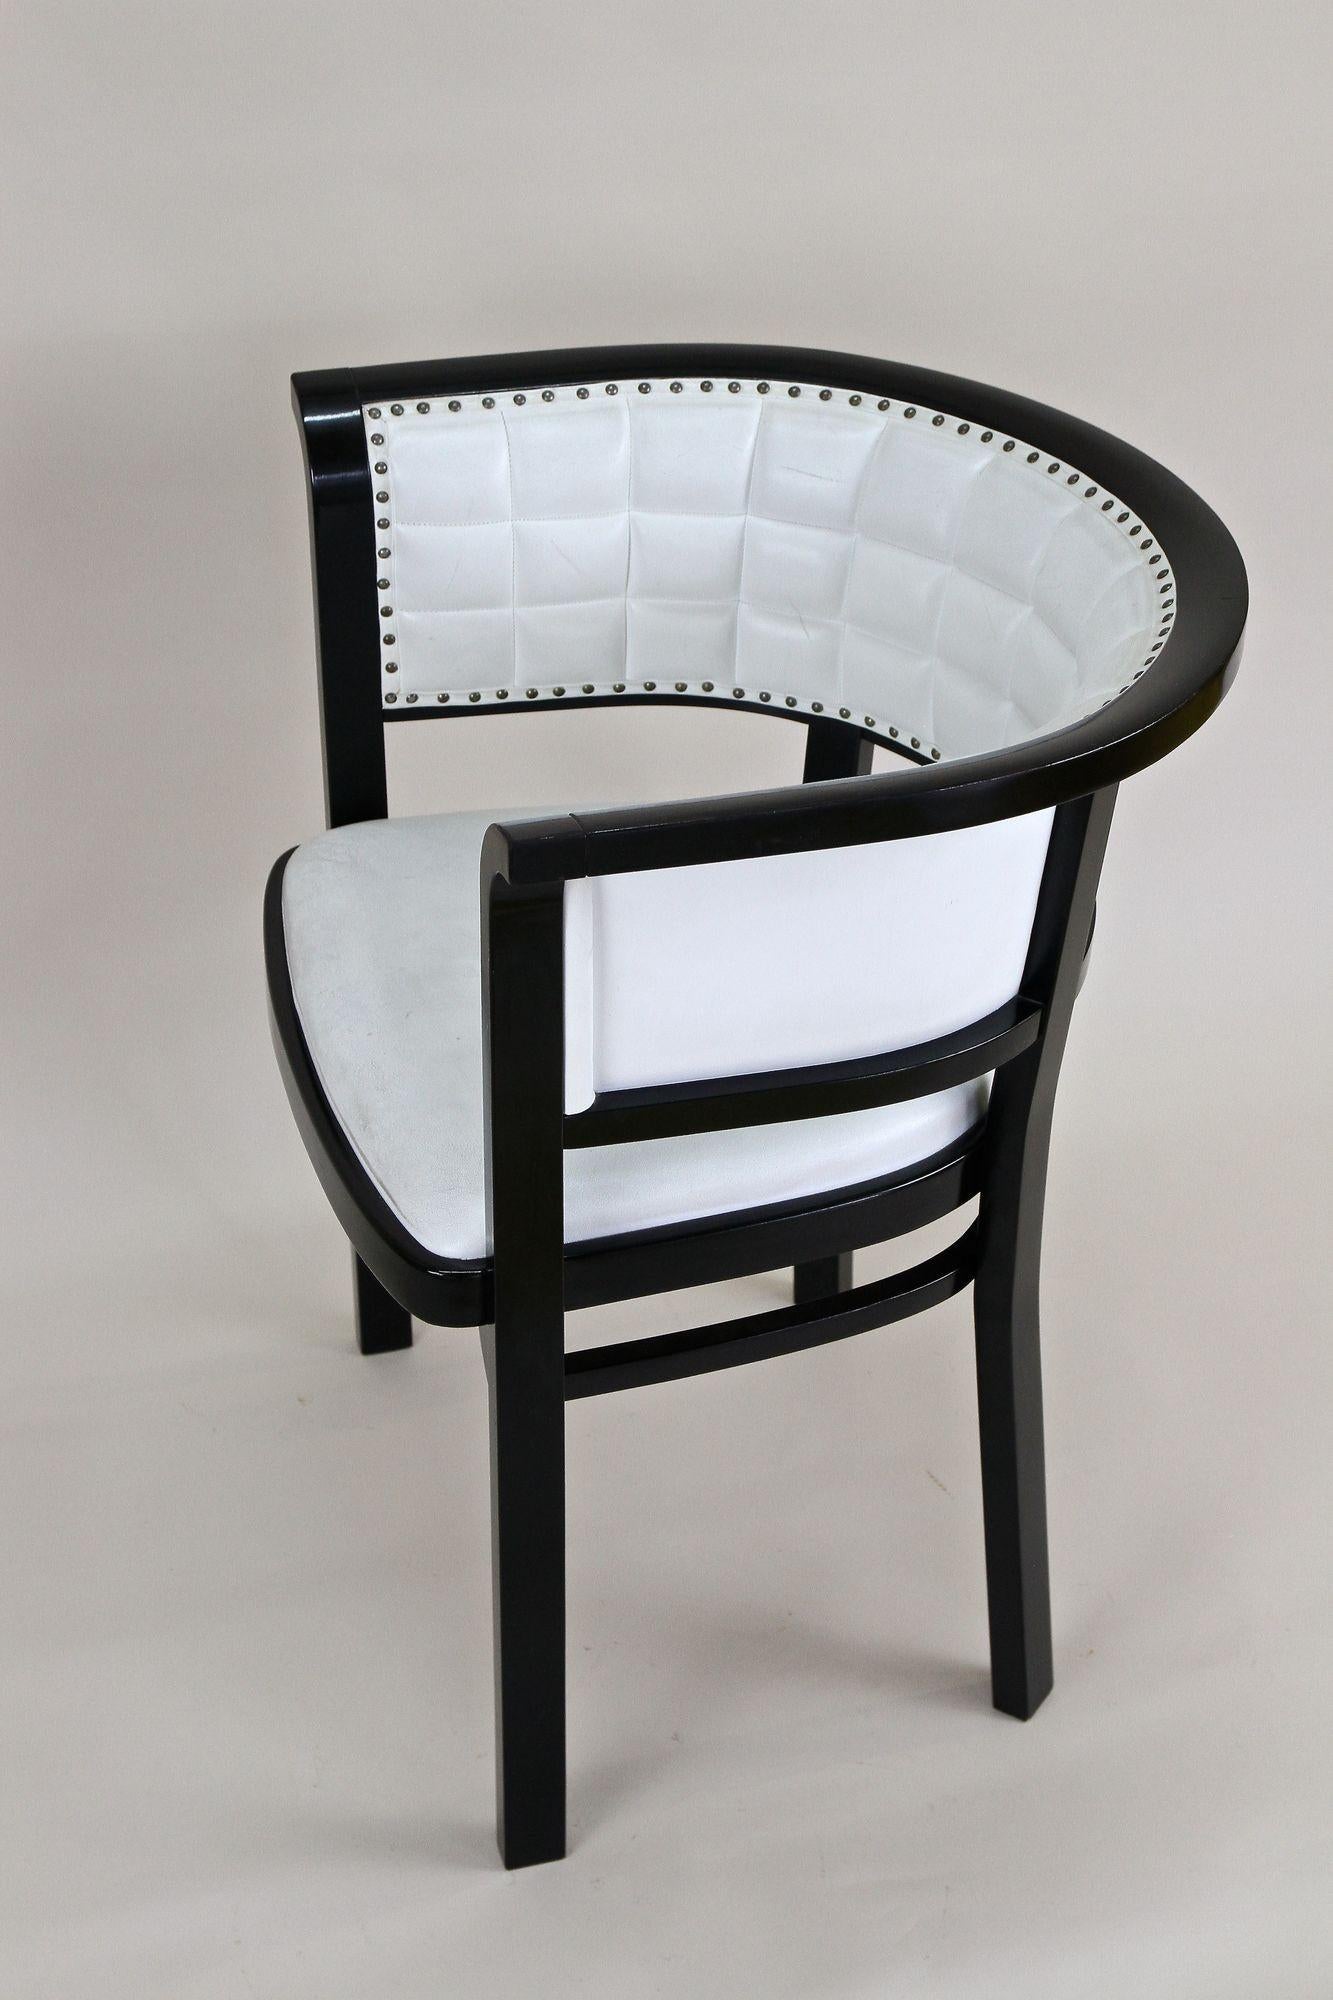 Black Thonet Armchair with White Leather, Design Marcel Kammerer, at circa 1980 For Sale 3